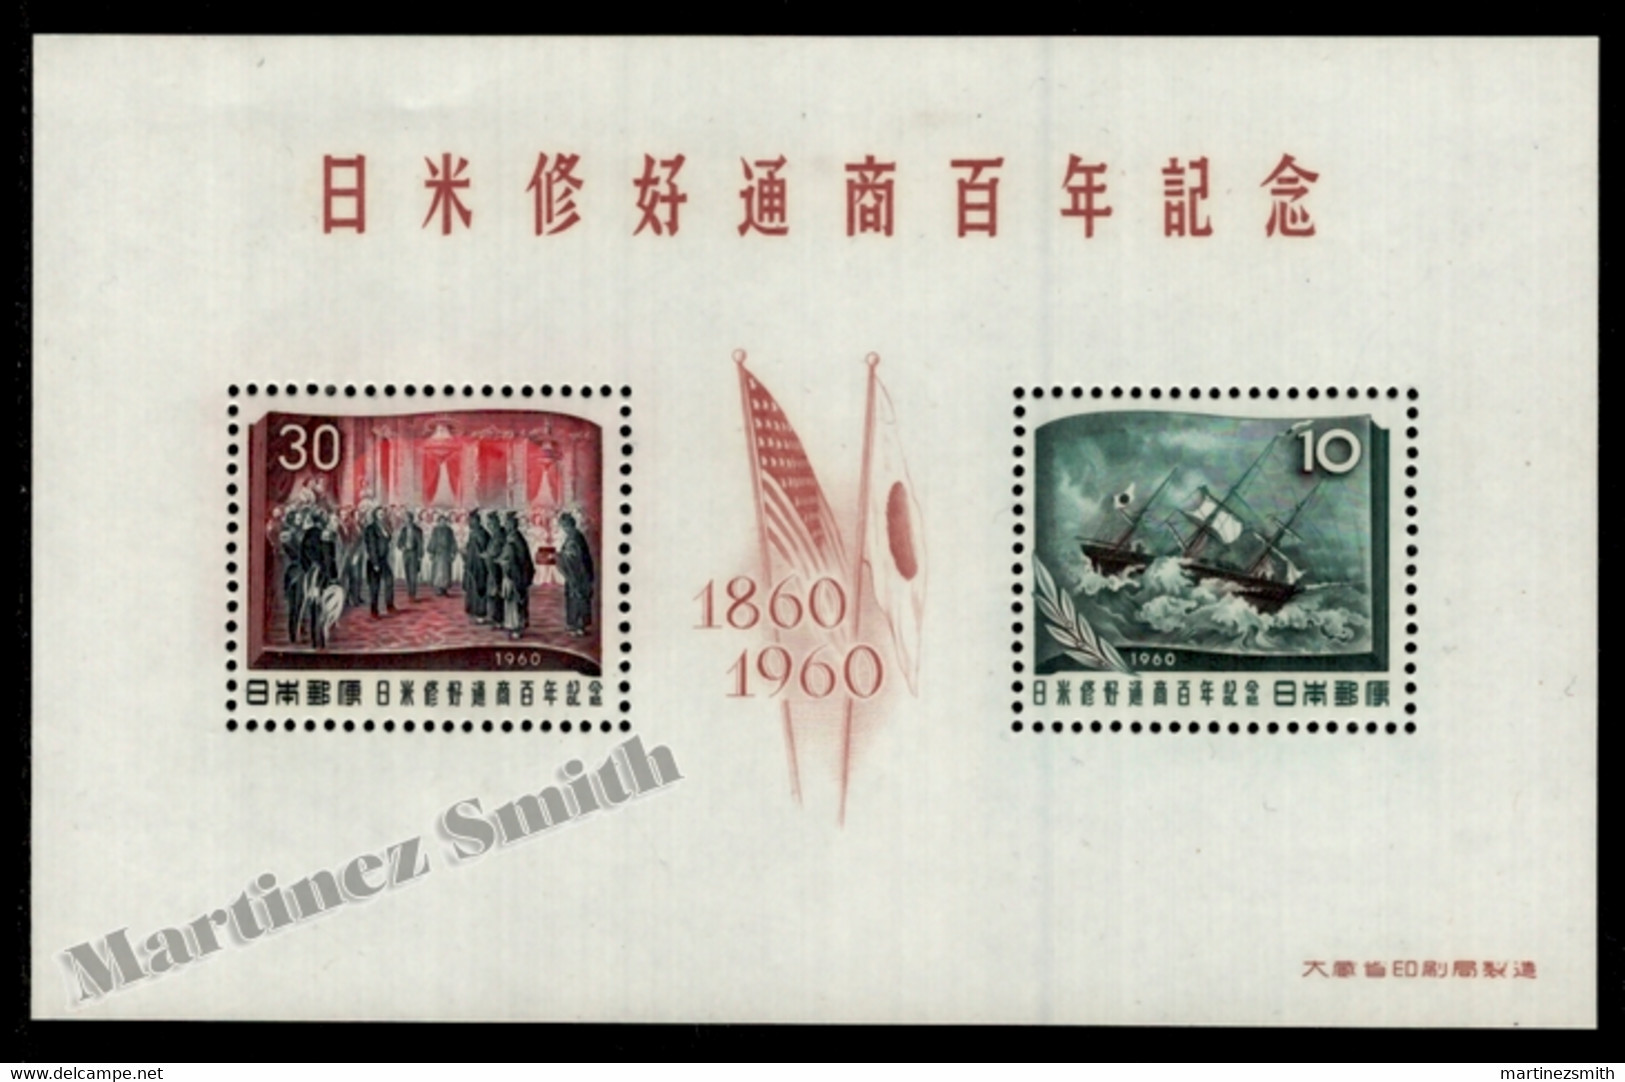 Japon - Japan 1960 Yvert BF 49, Centenary Commercial Agreement With The United States - Miniature Sheet - MNH - Blocs-feuillets